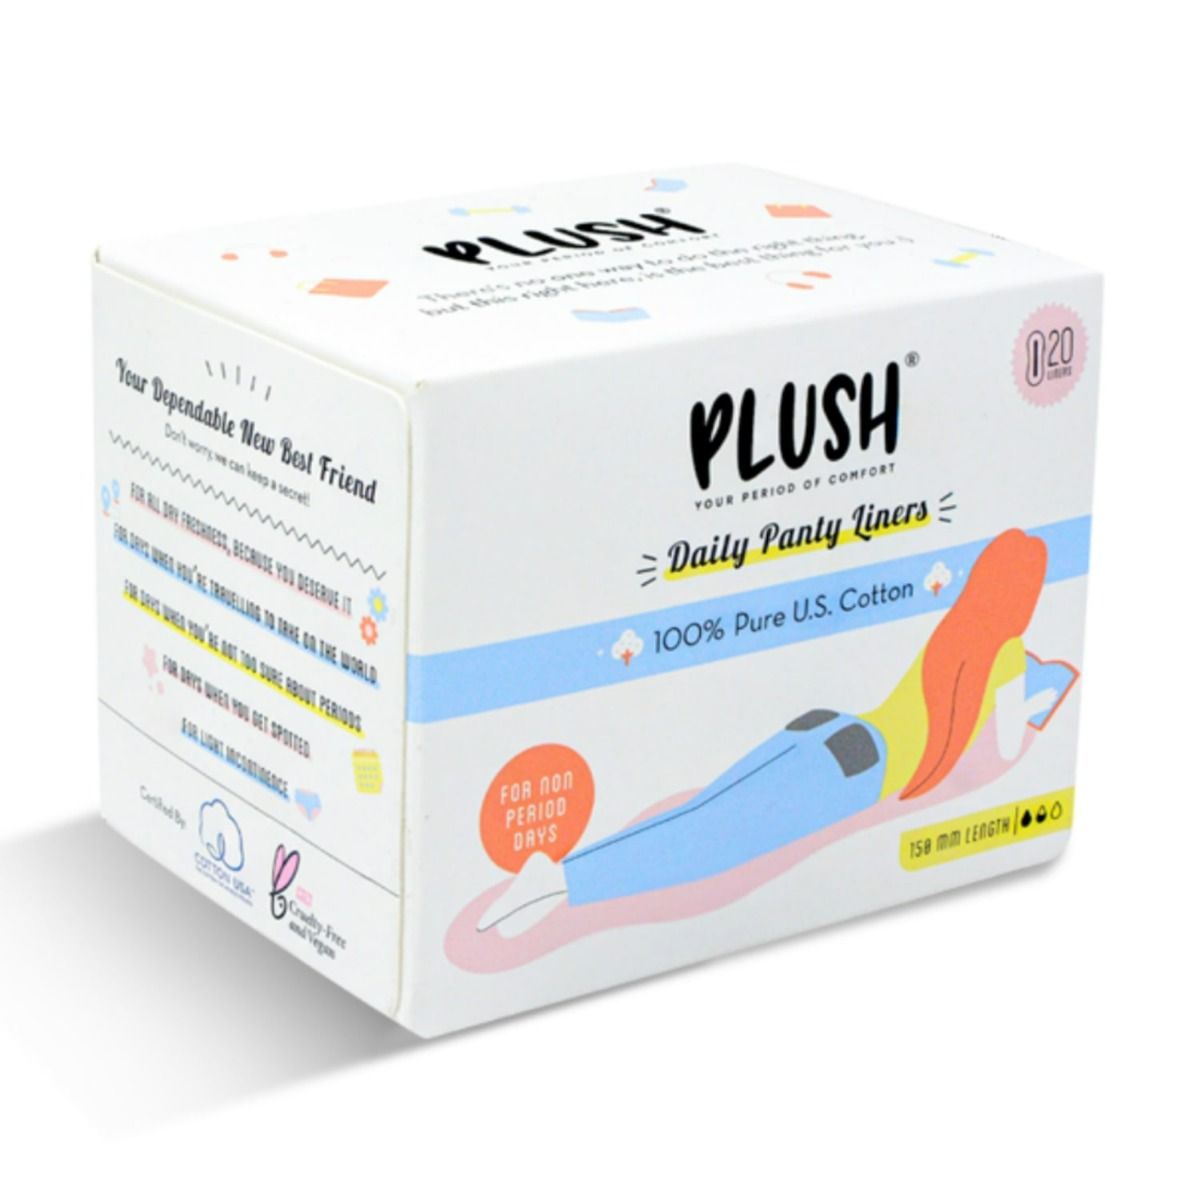 Buy Plush 100% U.S Pure Cotton 158 mm Daily Panty Liners,  20 Count Online